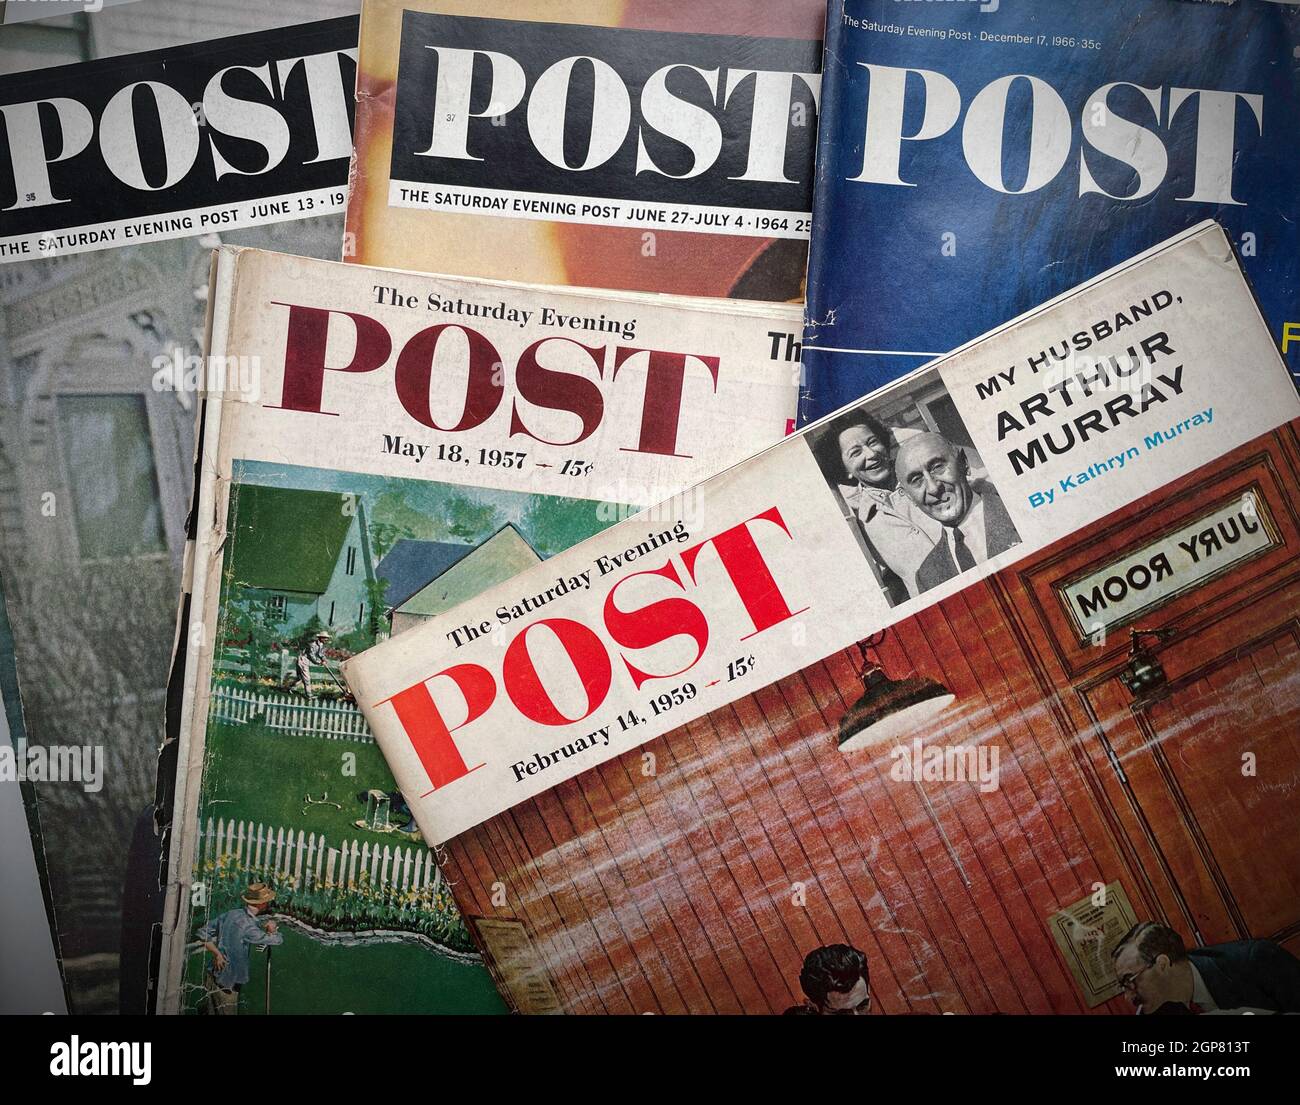 The Saturday Evening Post 1950s Magazine Covers, USA Stock Photo